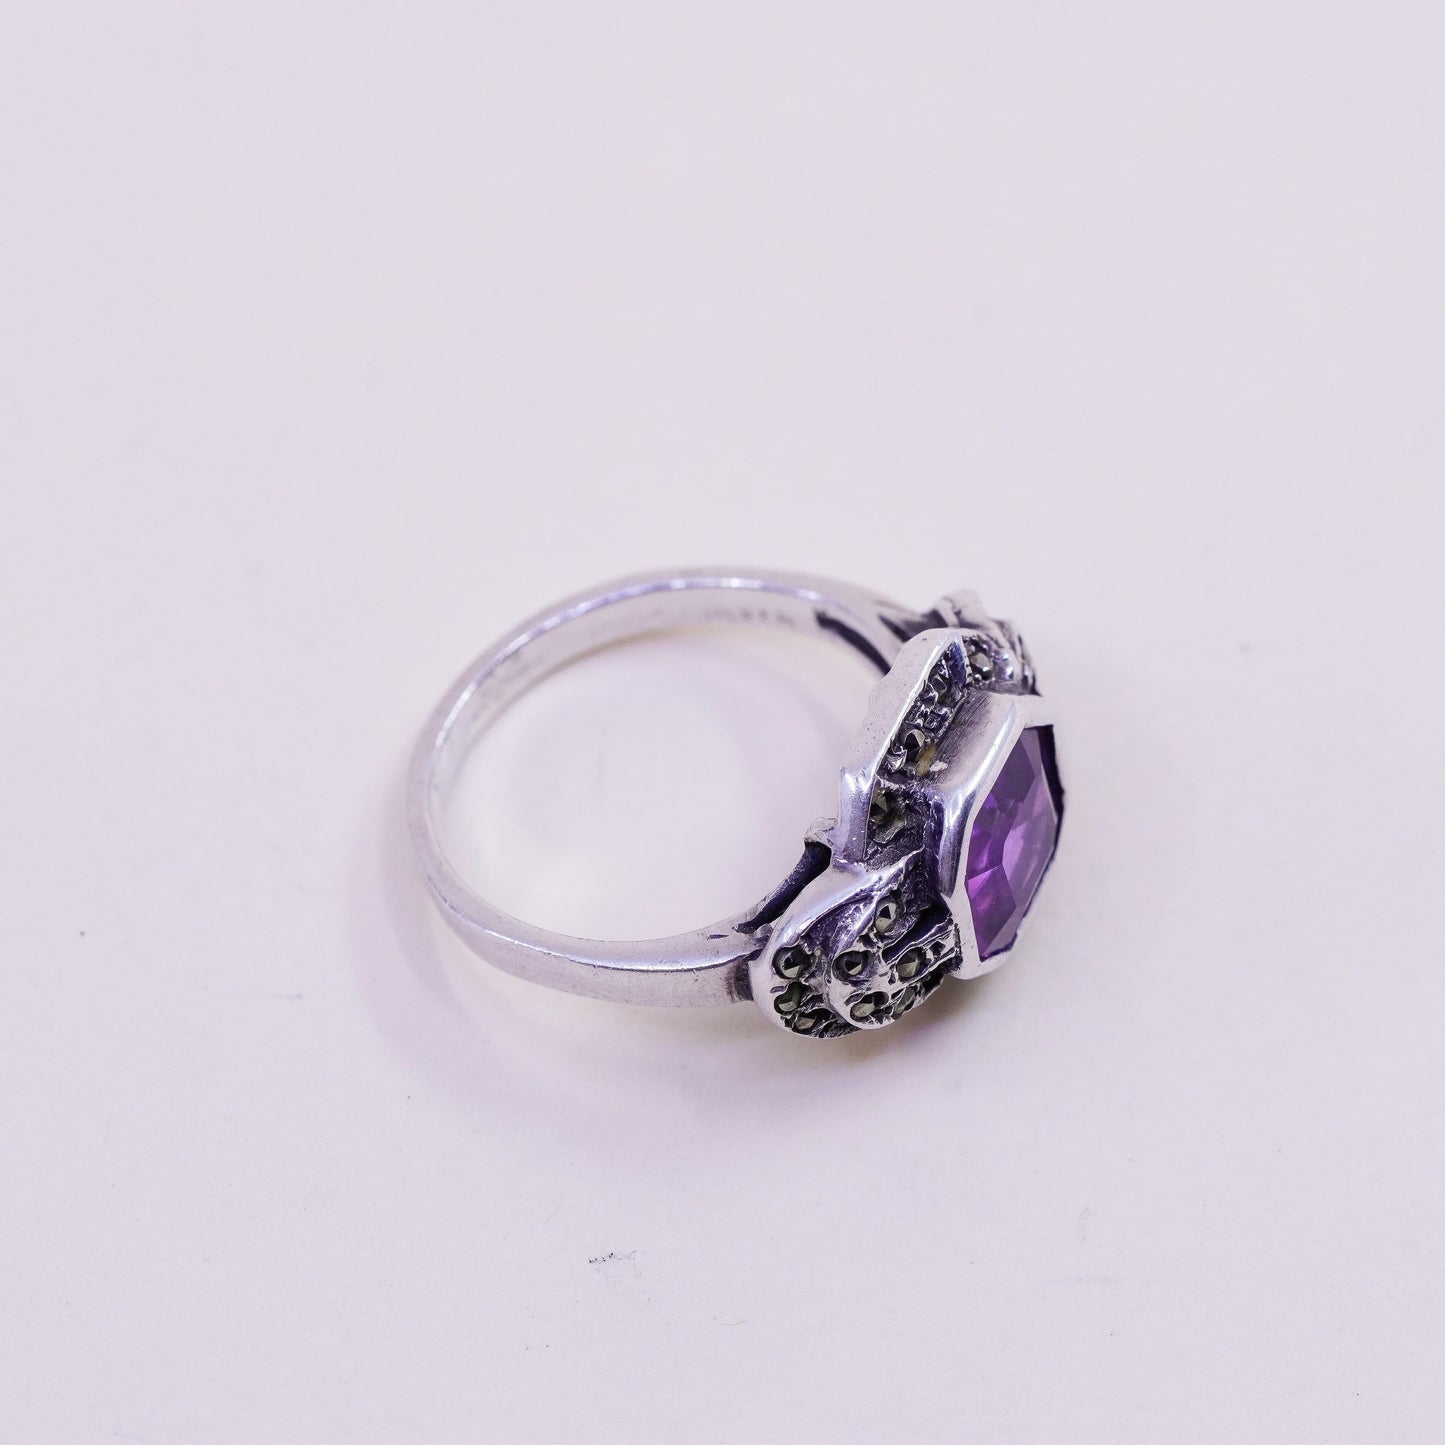 Size 6.25, Vintage sterling 925 silver handmade ring with amethyst marcasite